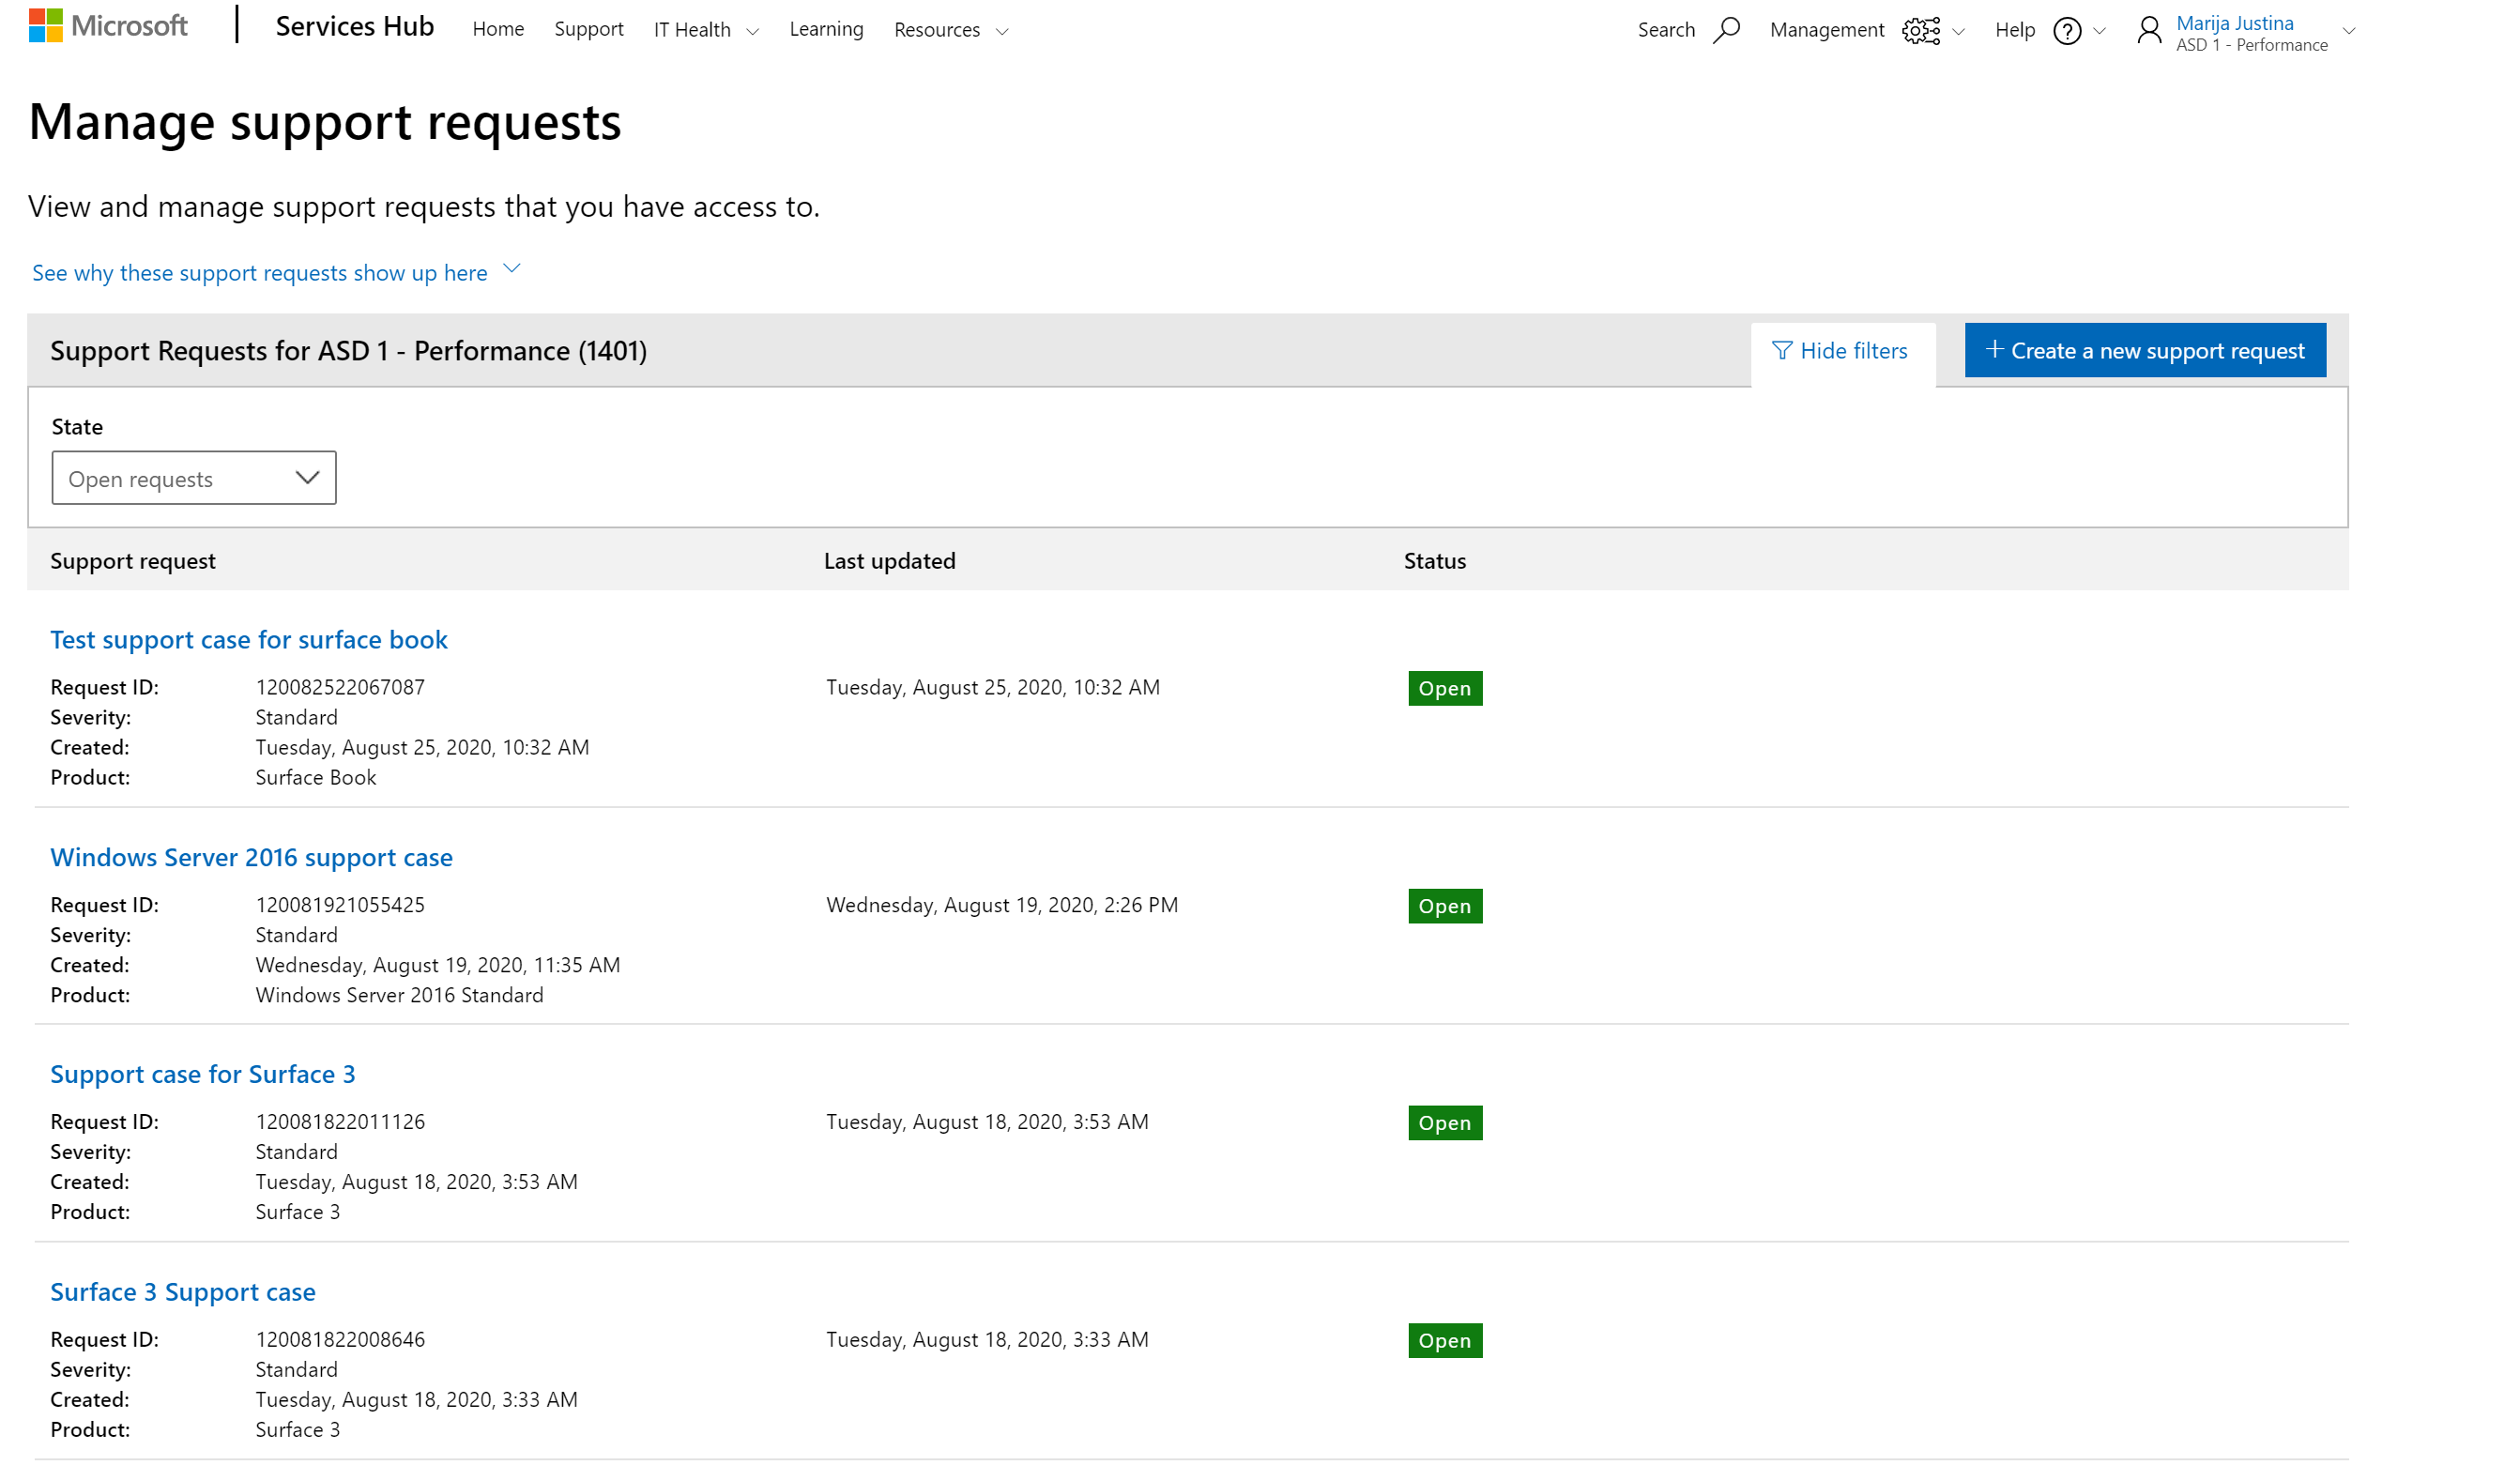 Manage support requests page that shows a list of a user's active support cases.